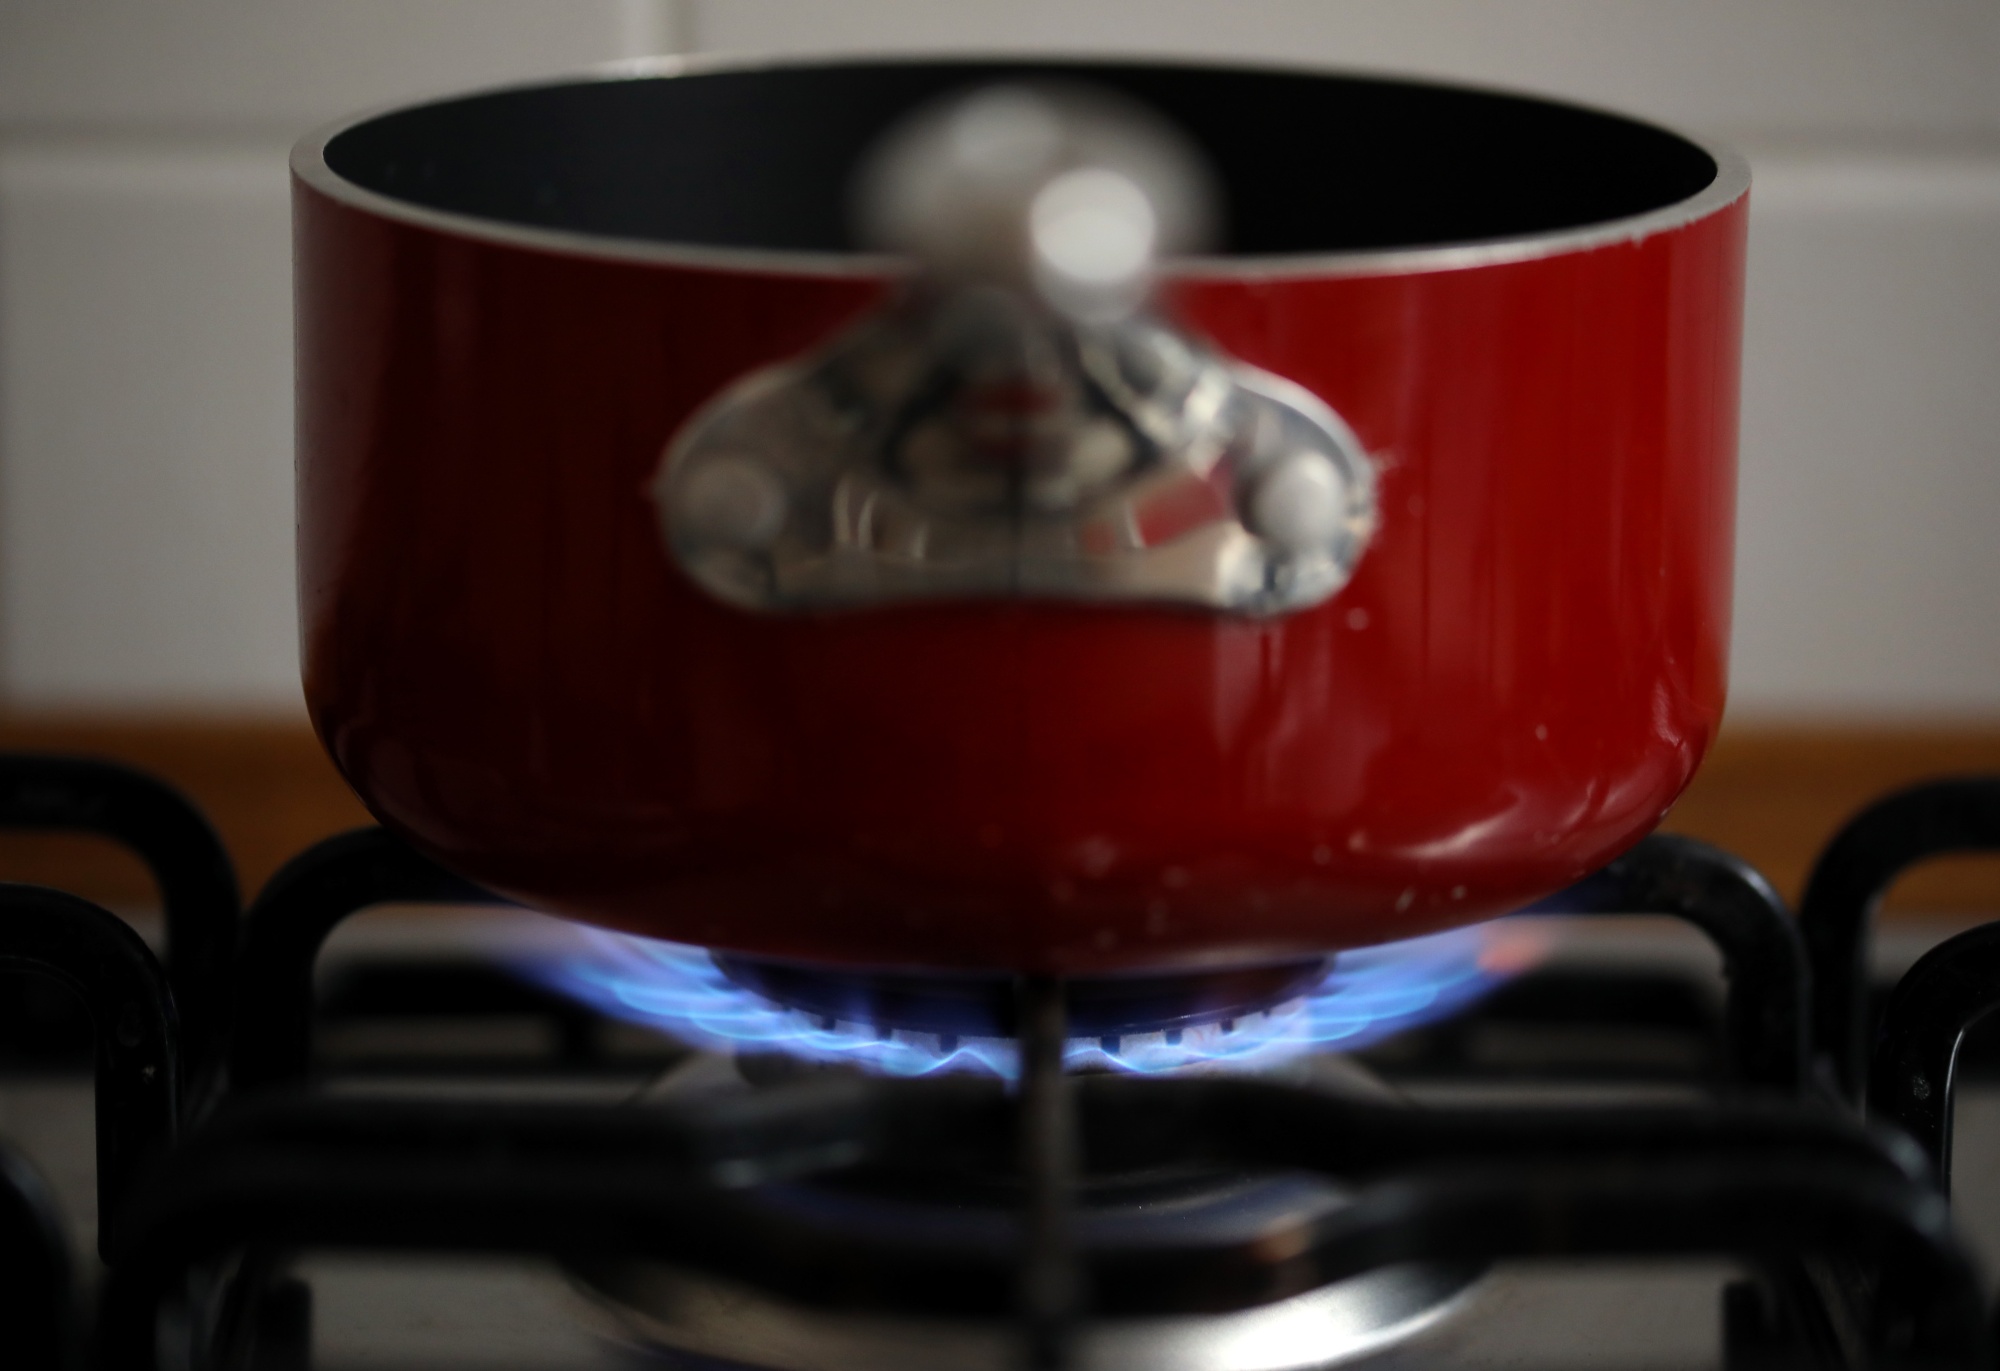 Gas stoves emit harmful pollutants, but experts urge considering risks in  context 